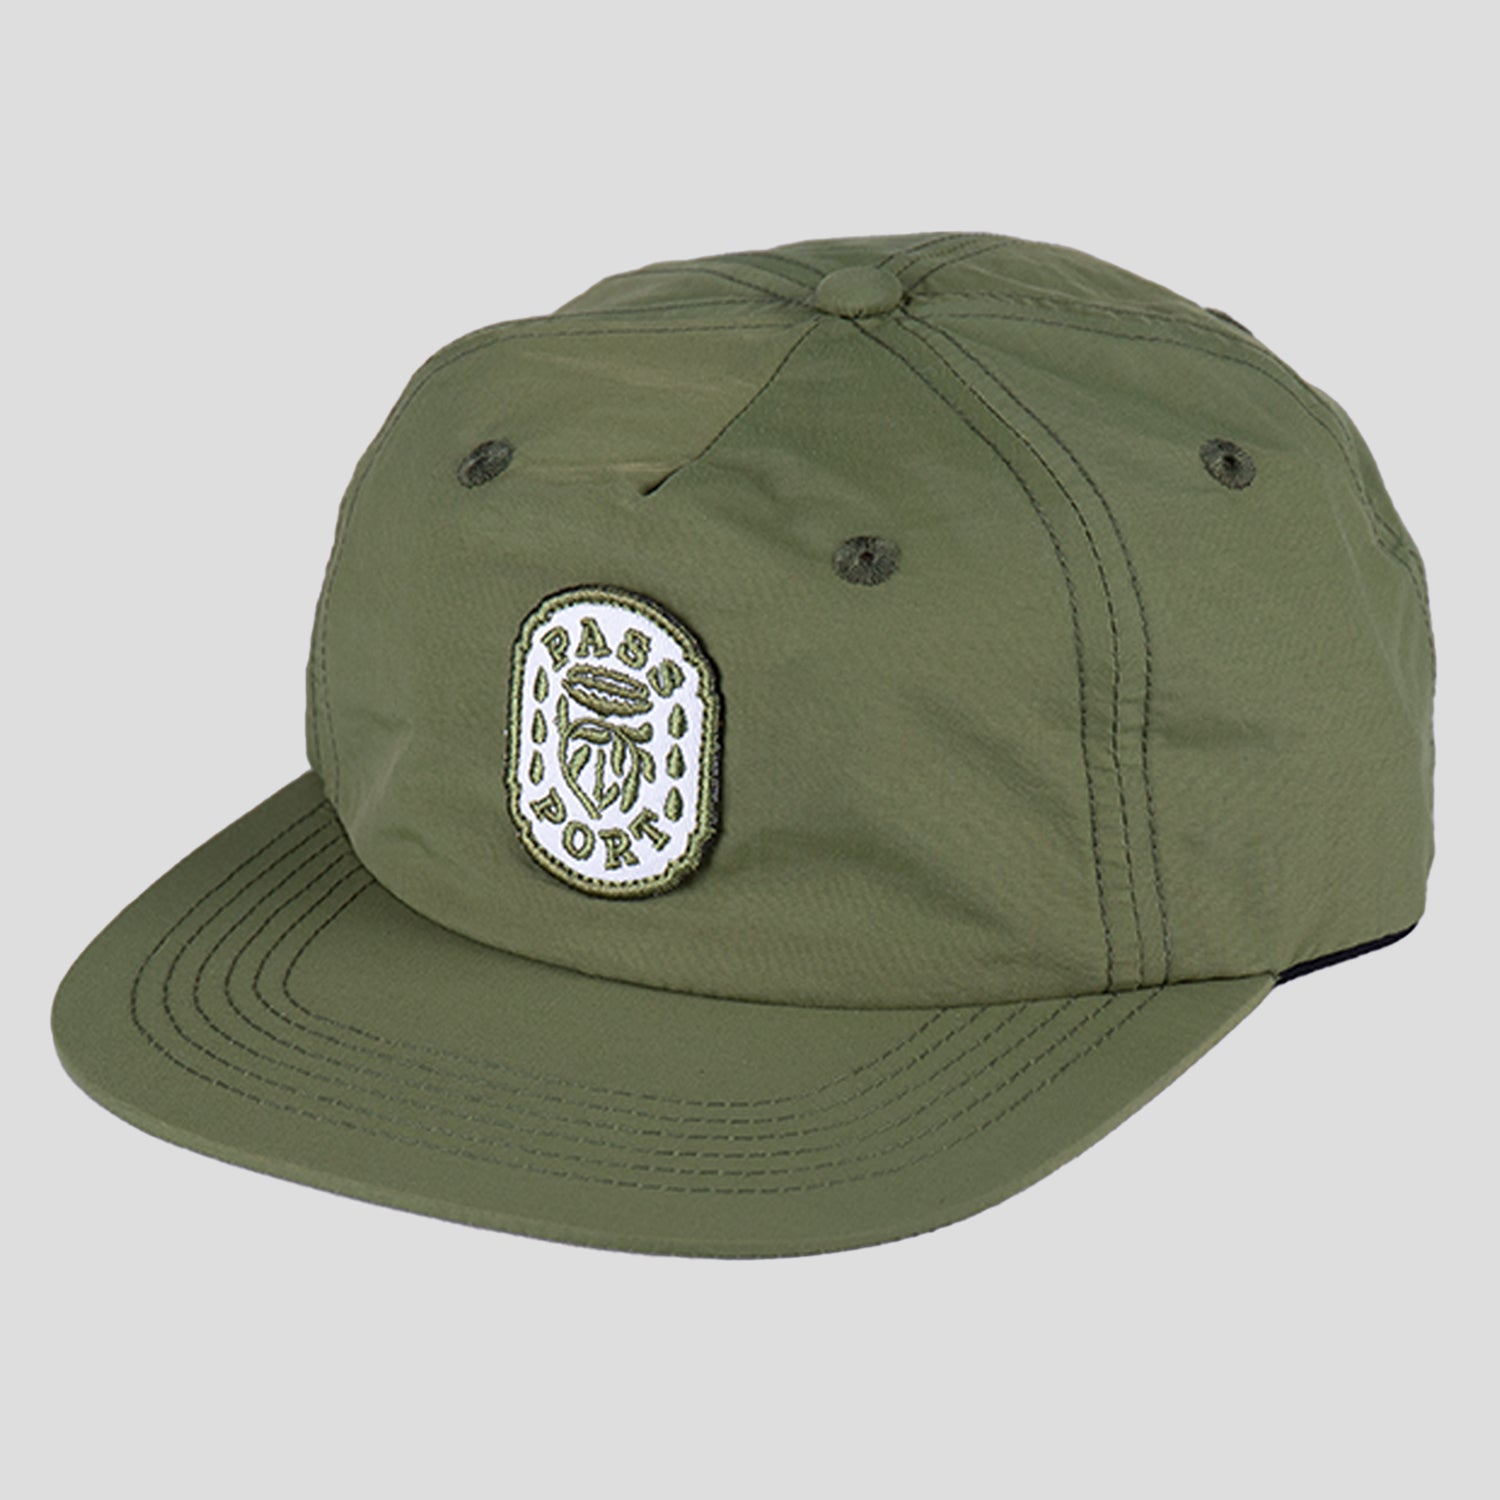 Pass~Port Fountain RPET Cap - Olive